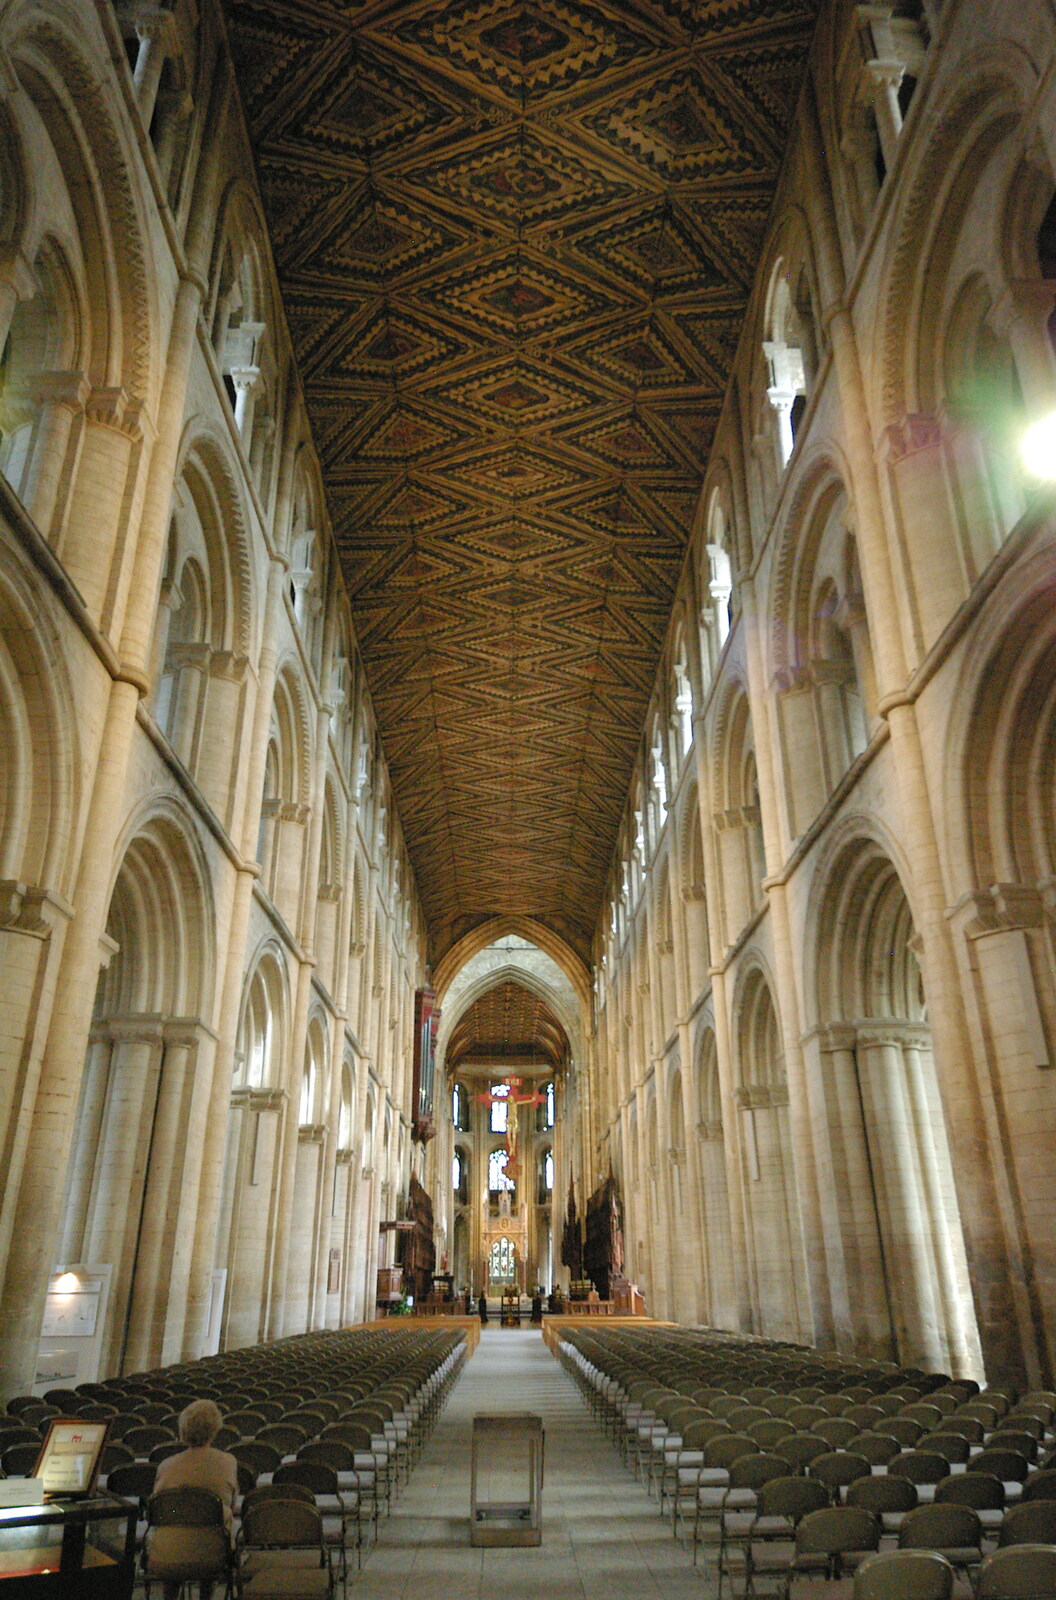 The nave and ceiling dating from 1230 from Peterborough Cathedral, Cambridgeshire - 7th September 2005